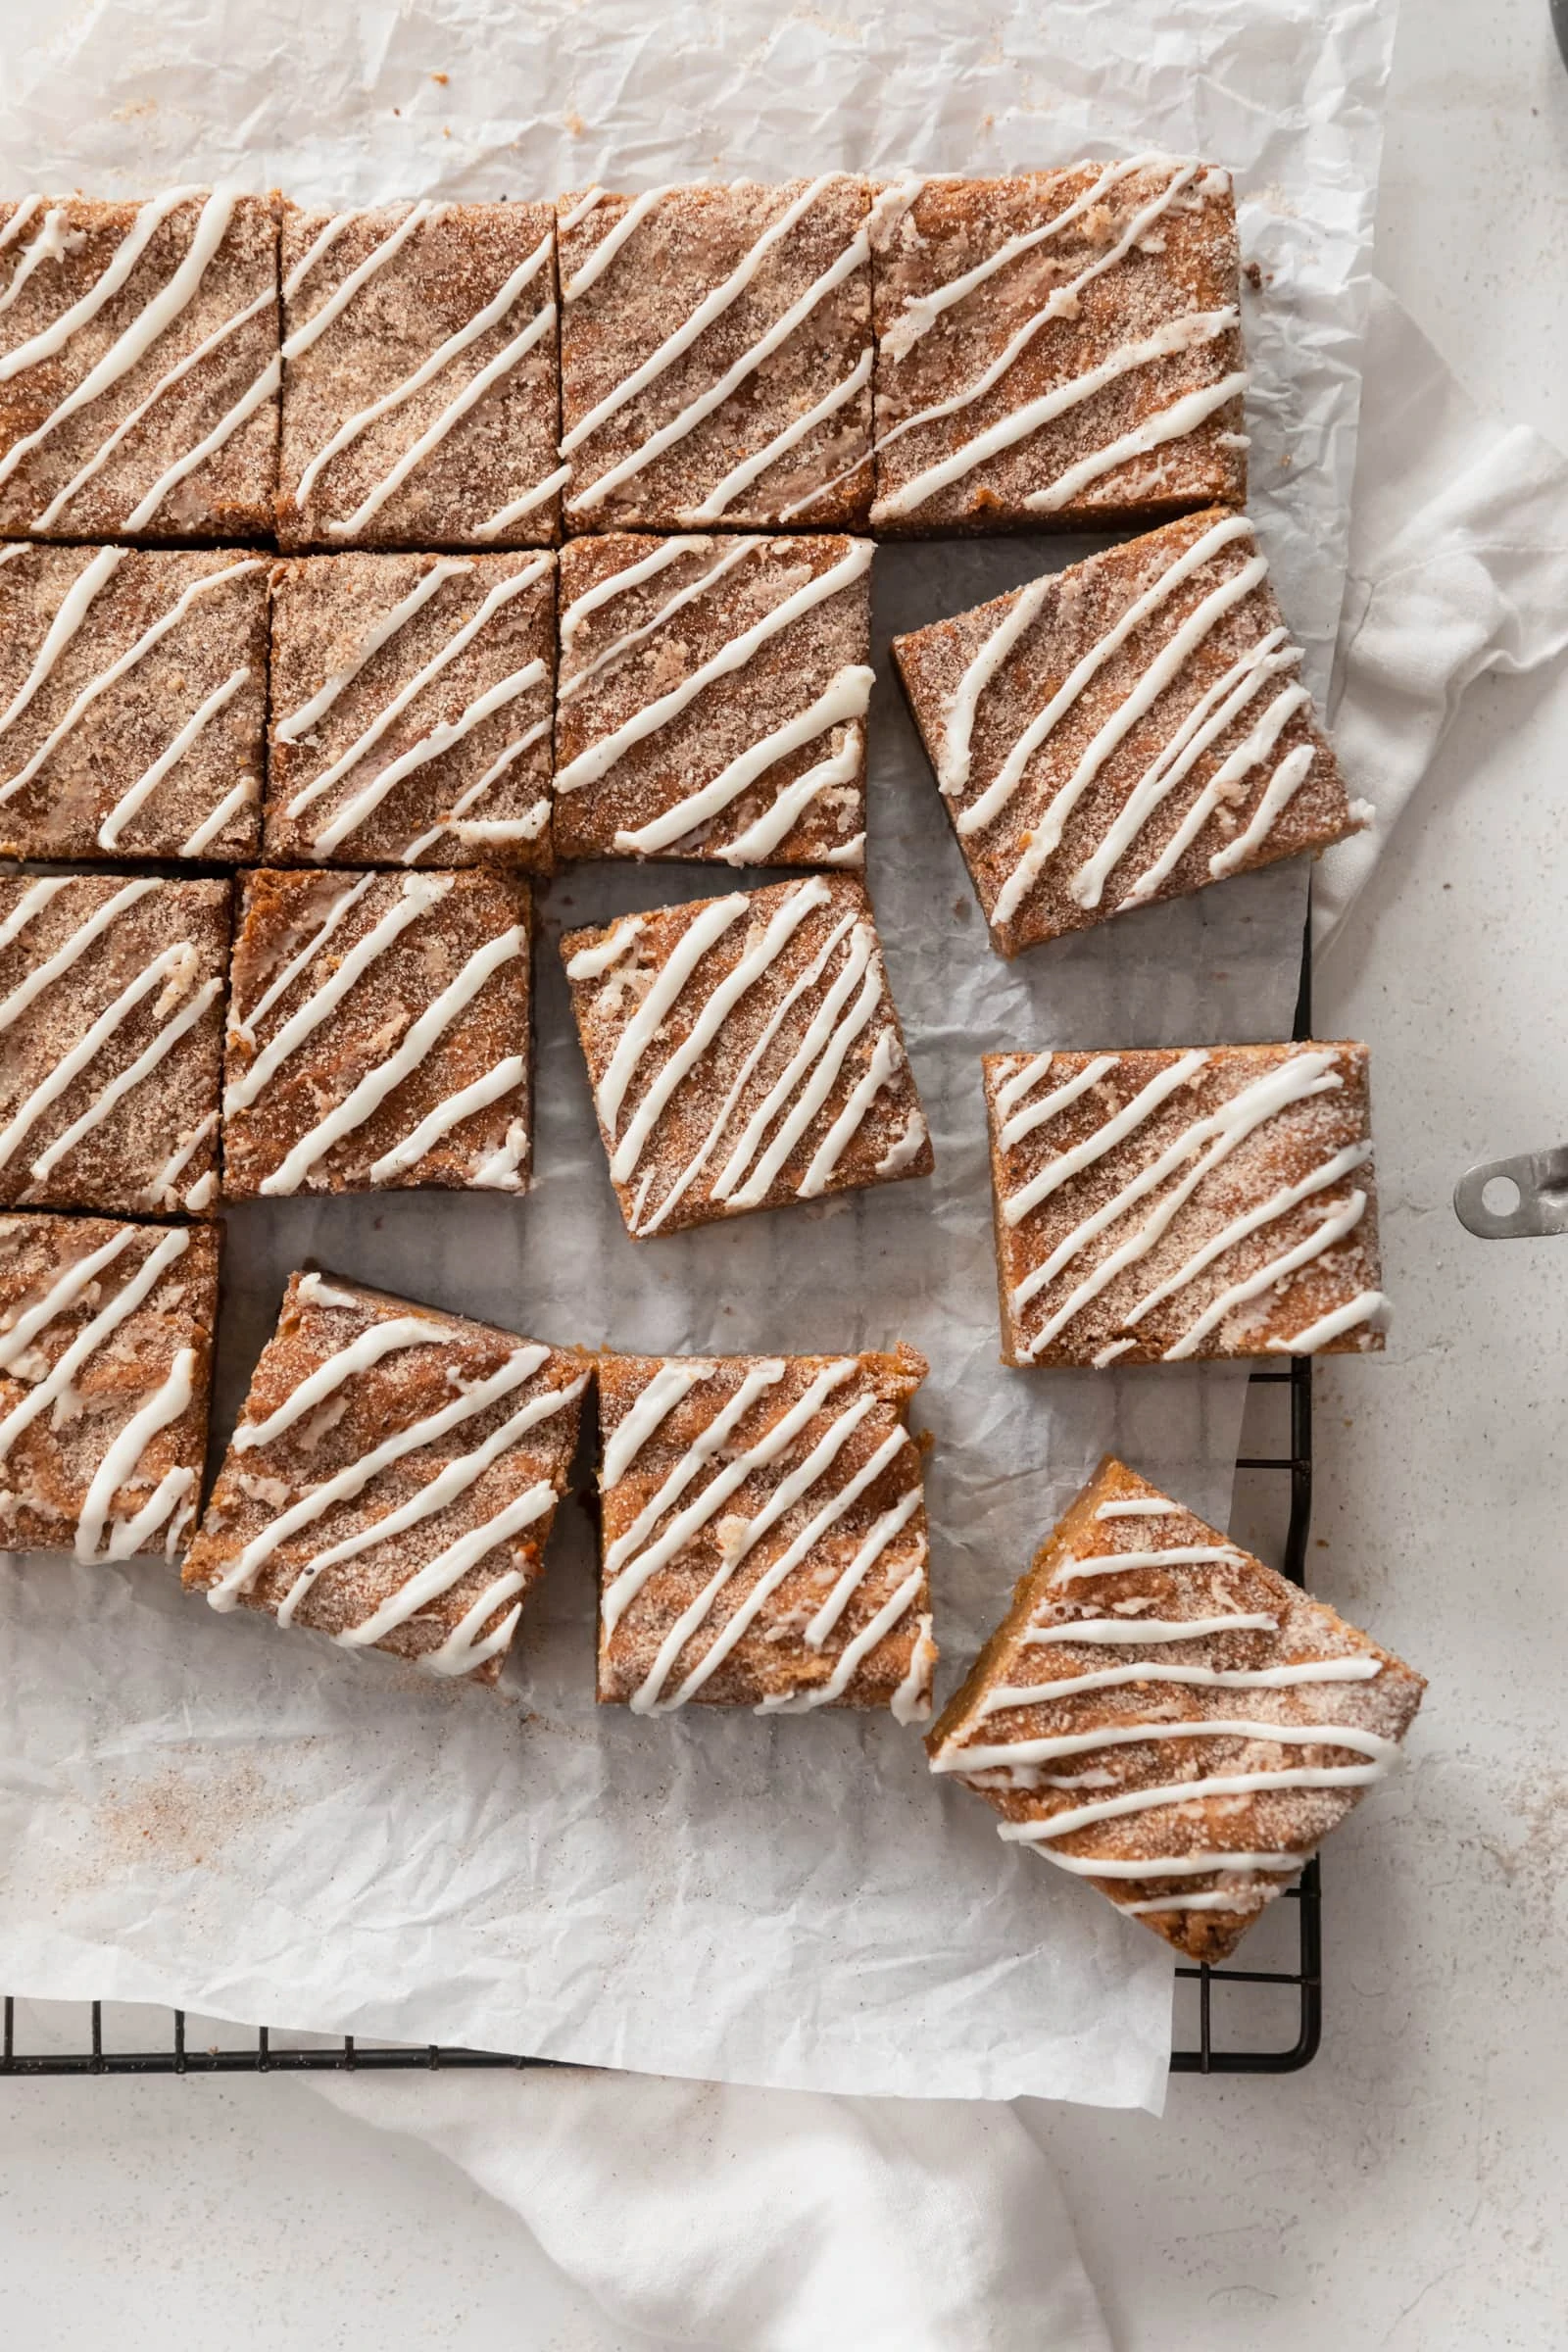 ginger molasses blondies with white chocolate drizzle